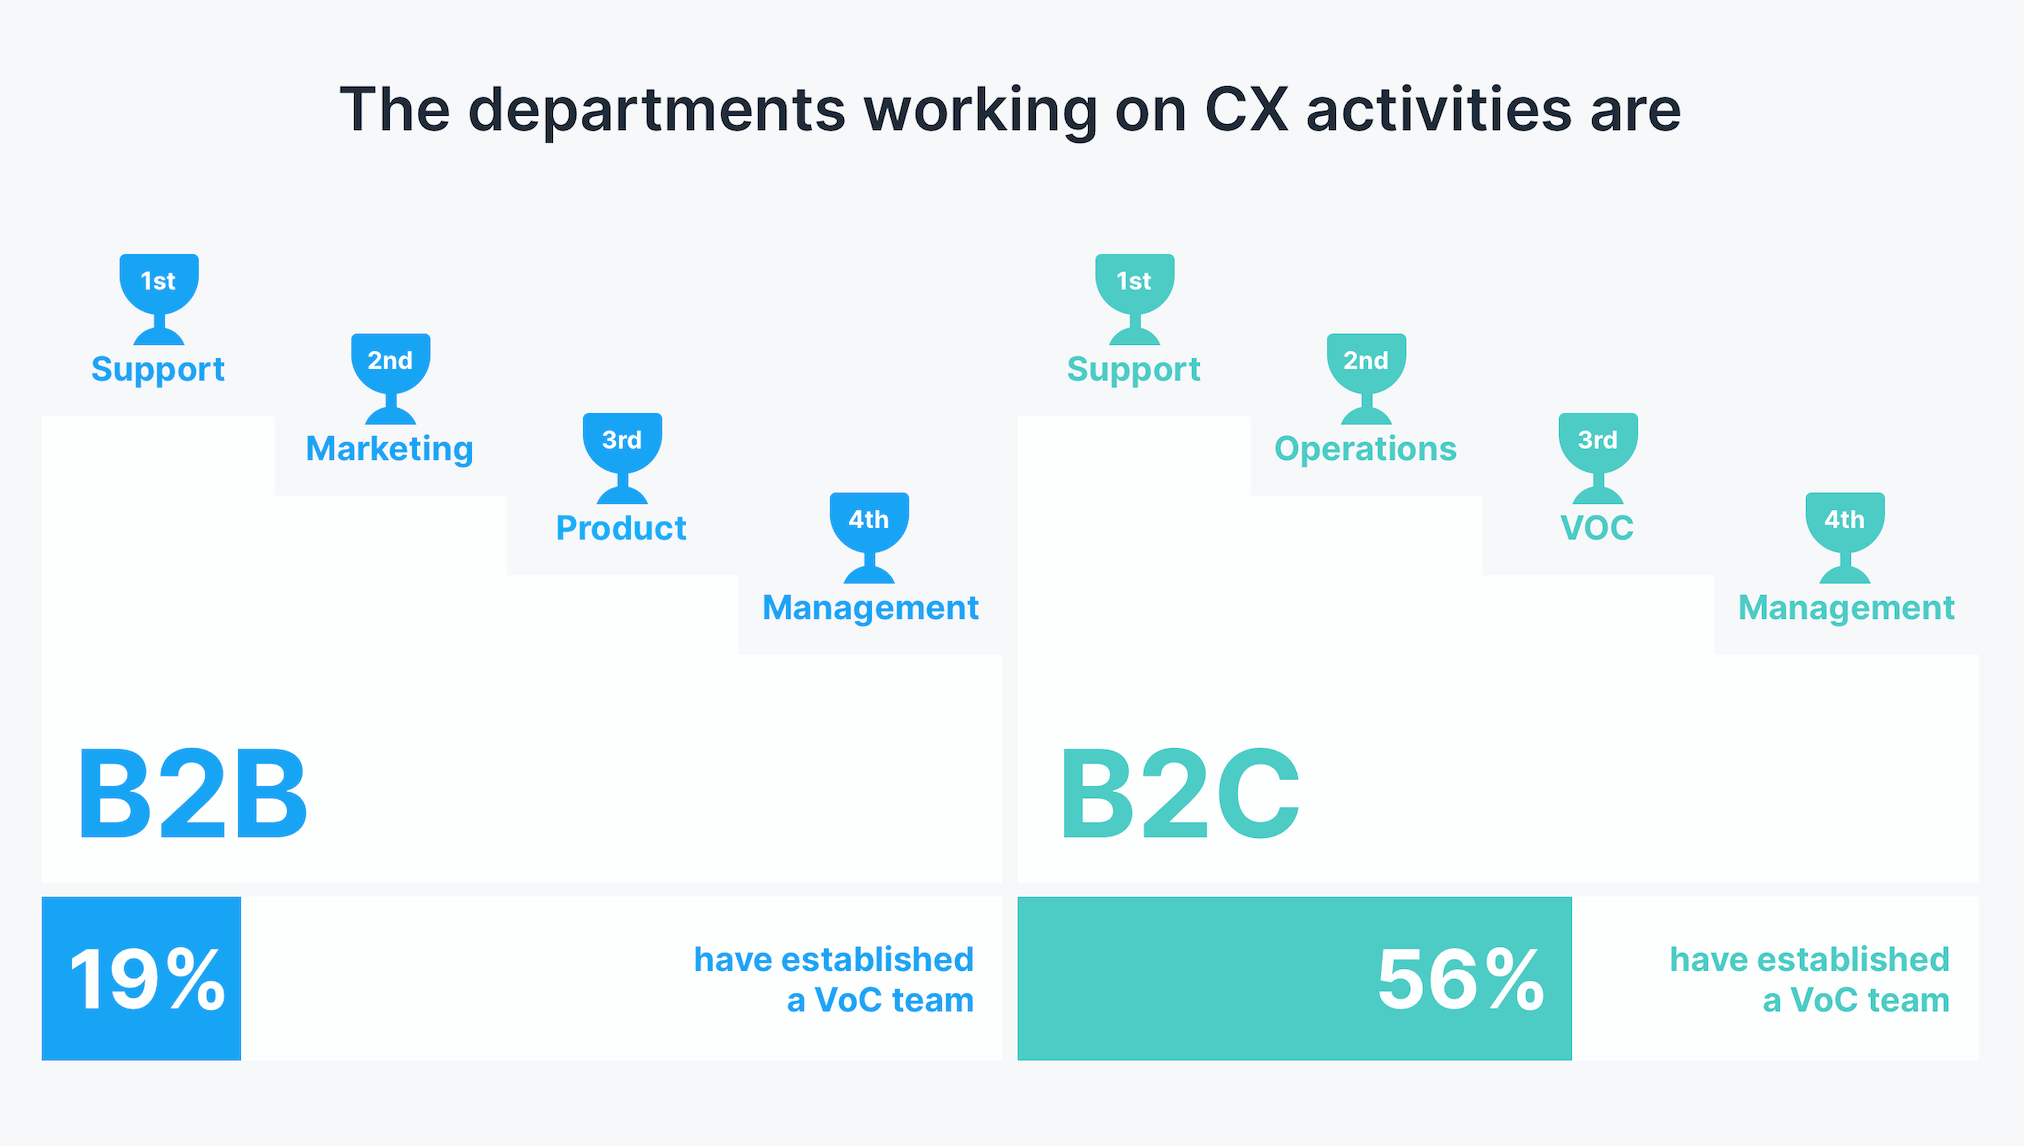 CX managers vs. Customer Support - who is taking the lead